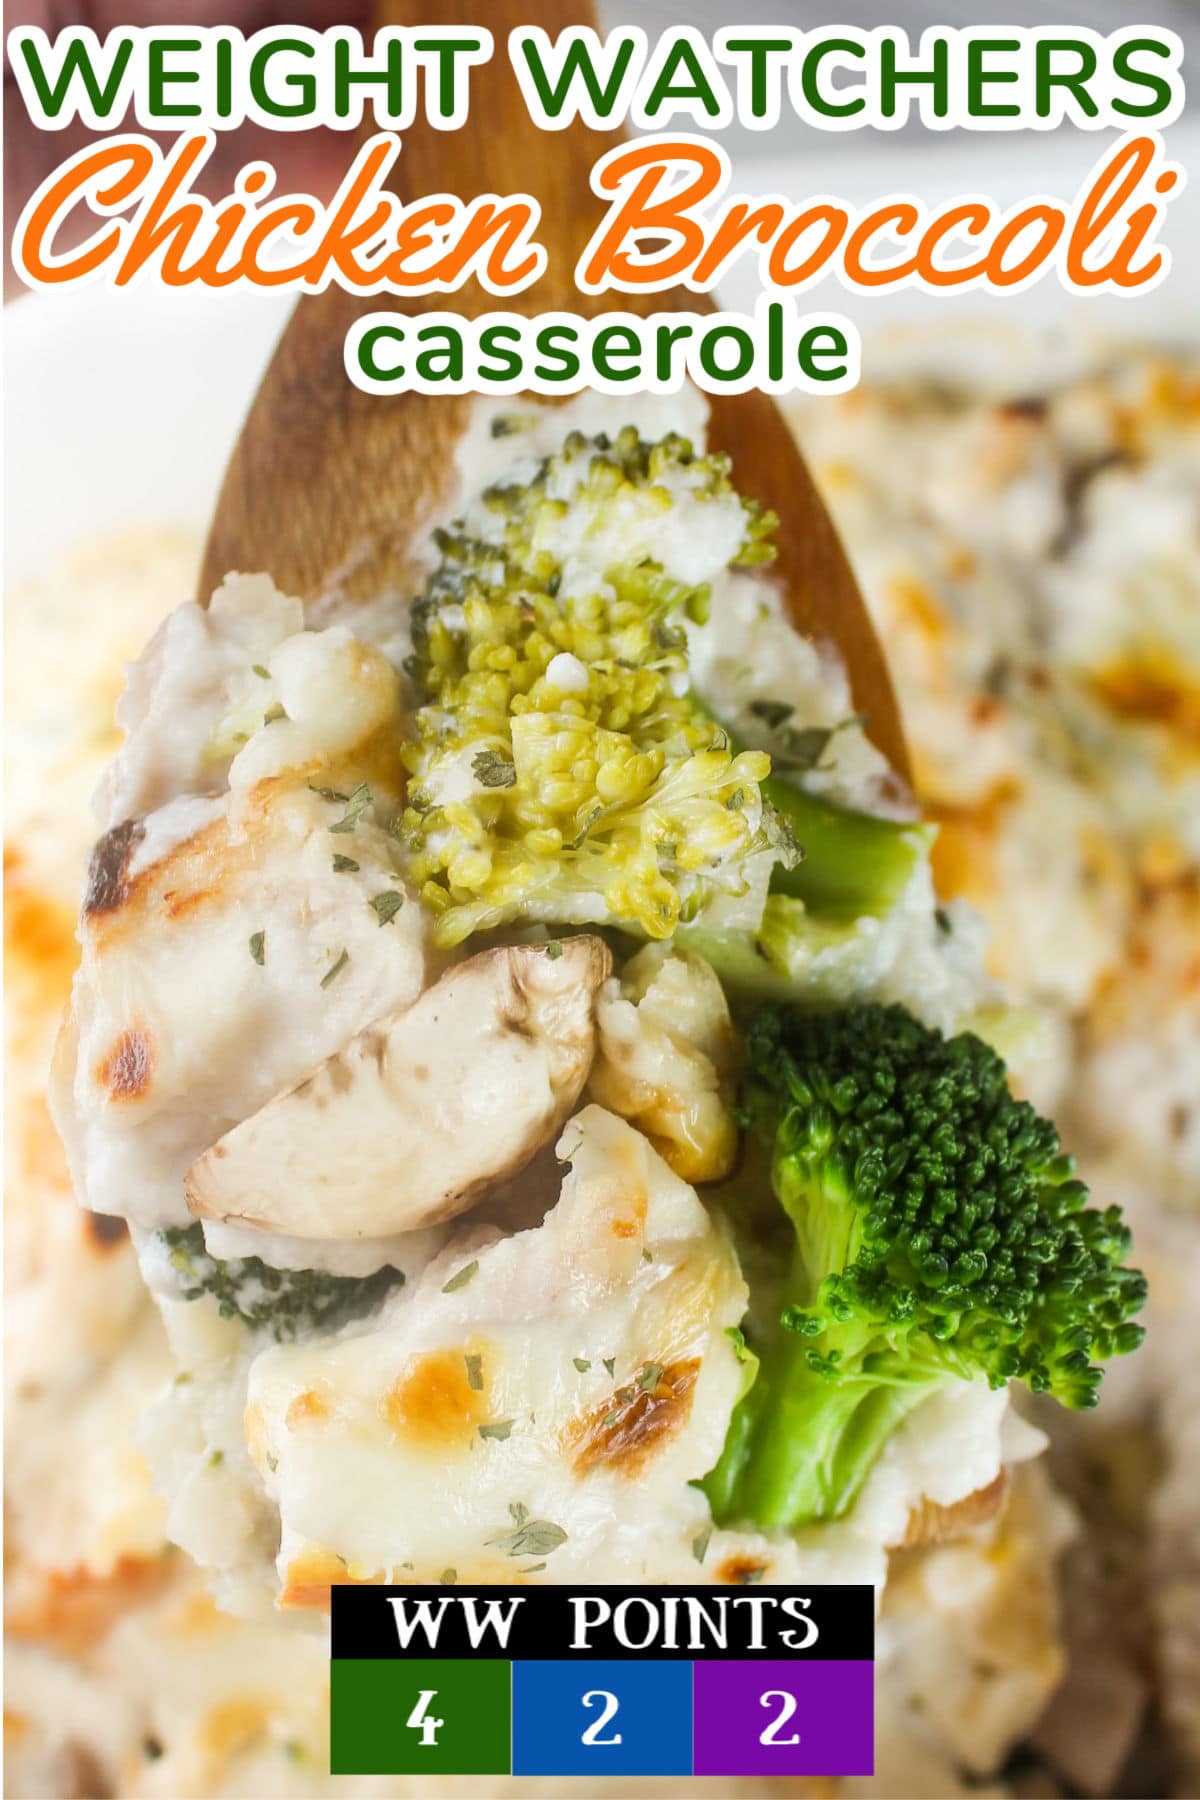 Weight Watchers Chicken Broccoli casserole has all the flavors you love but so much less fat and calories! Swapping out the regular rice for cauliflower rice is a great start - but I have a couple other tweaks you'll have to check out! This serves a family or leaves you with leftovers for a quick lunch!  via @foodhussy